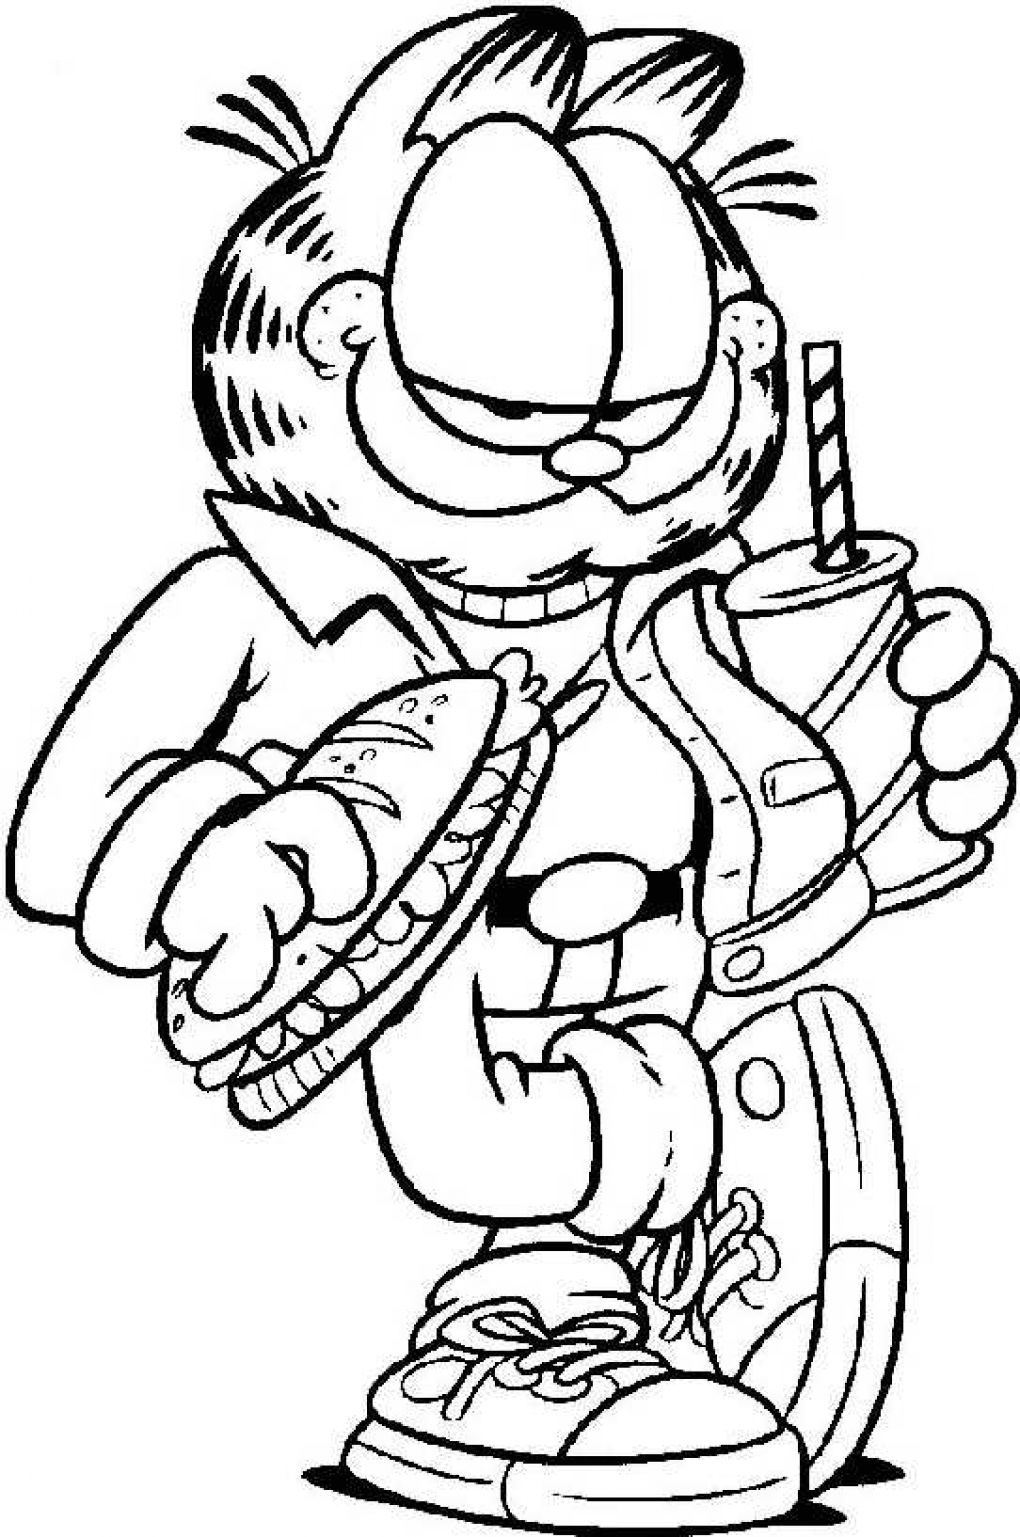 Garfield coloring pages to download and print for free